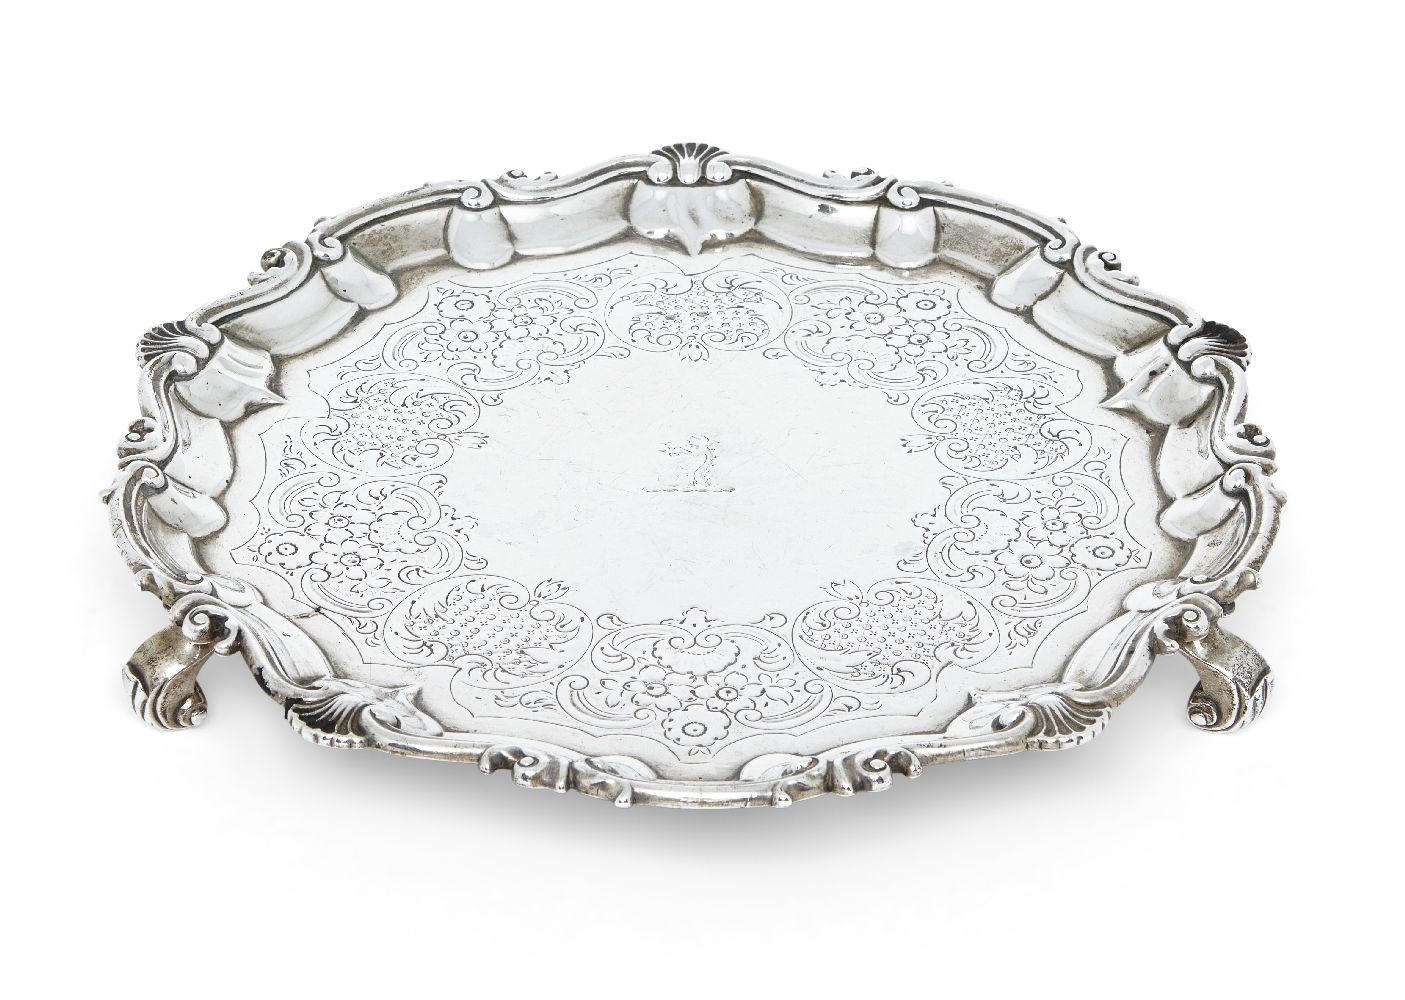 A George III silver salver, London, 1804, William Frisbee, of shaped circular form with shell and